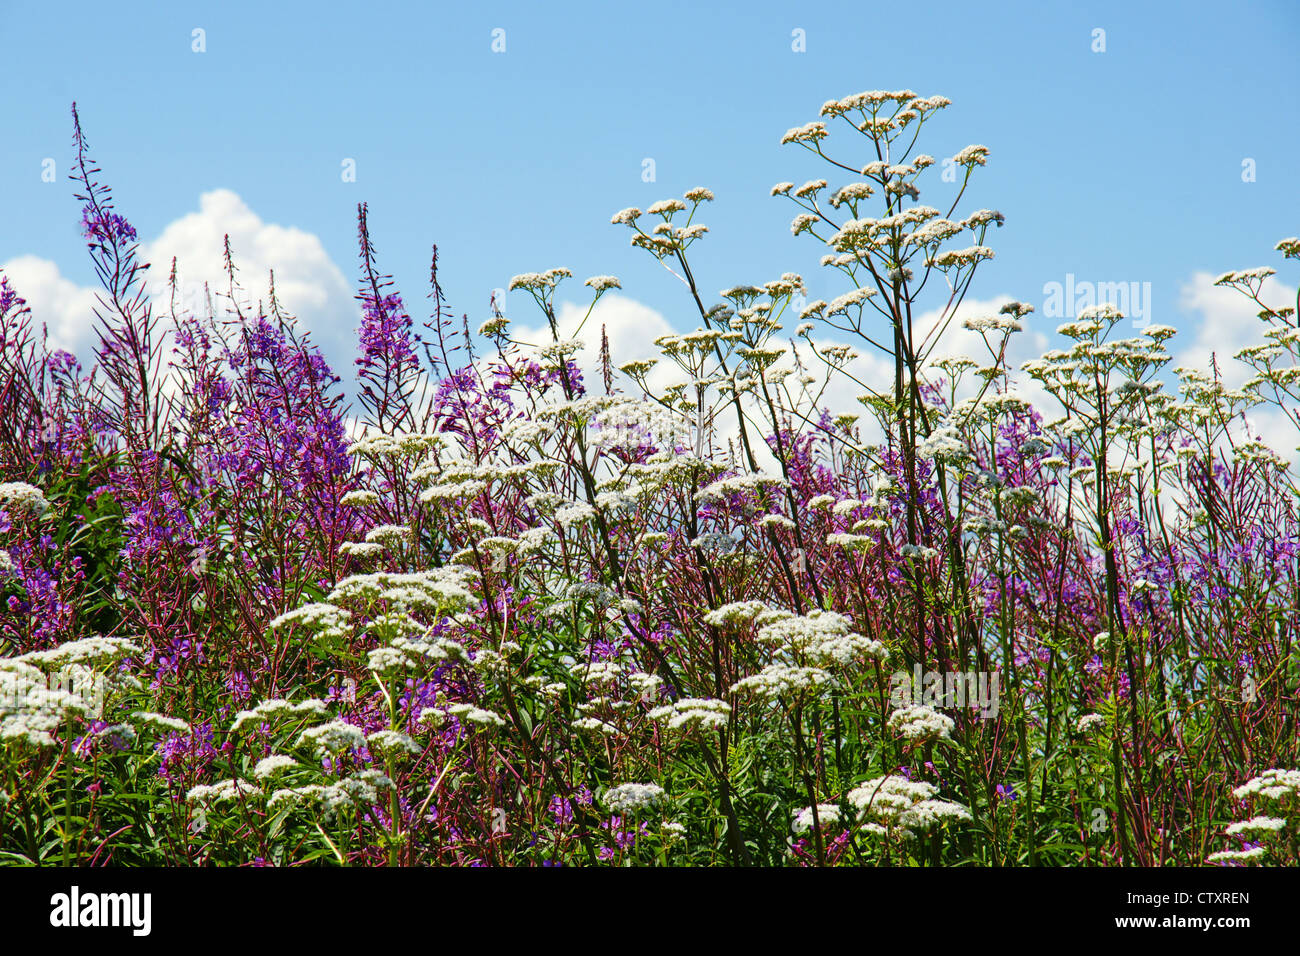 Beautiful floral background with purple fireweed and white valerian wildflowers against the blue sky. Stock Photo